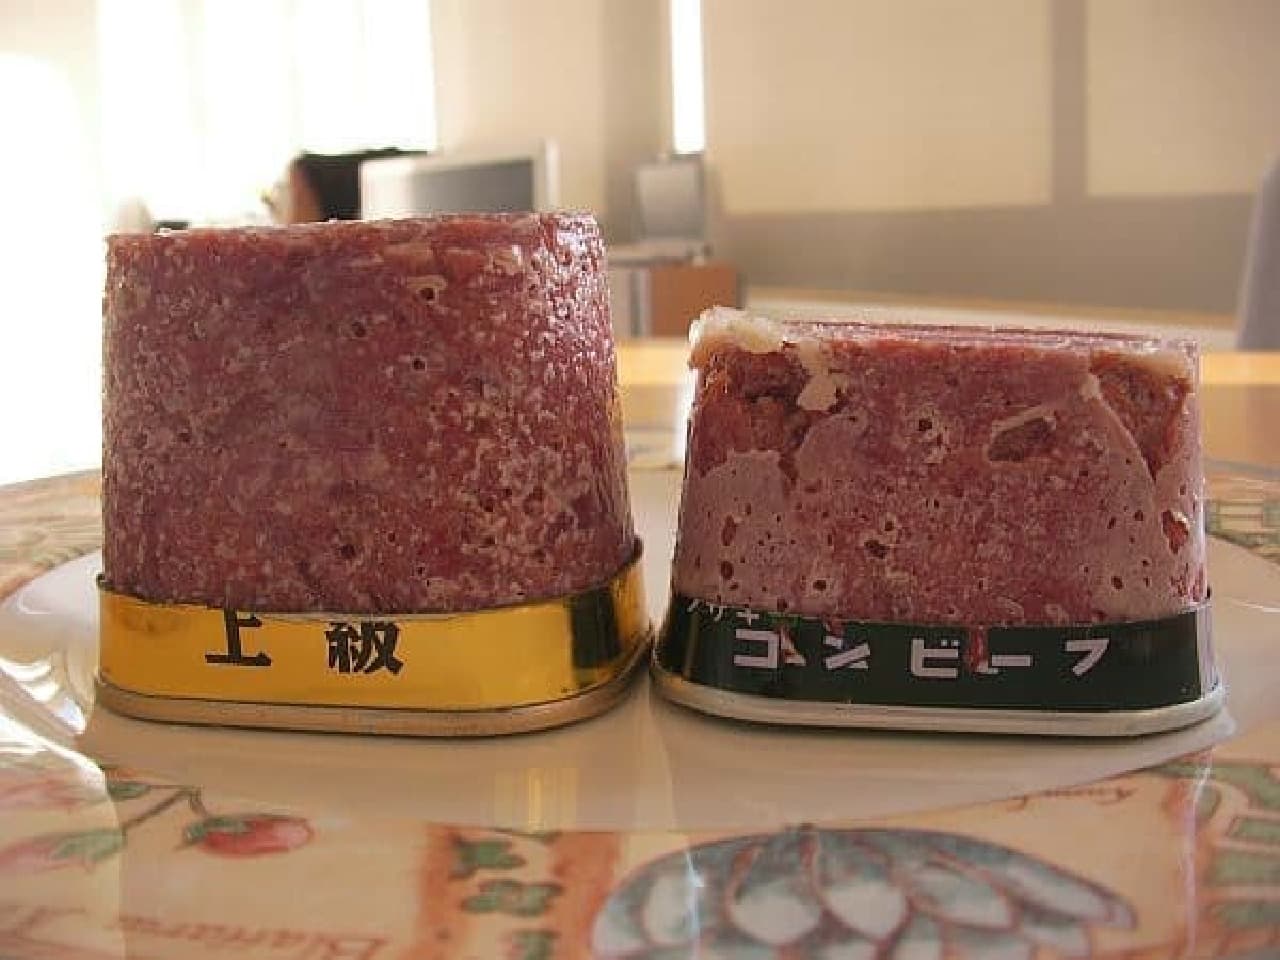 The appearance of opening the can It seems that the "advanced" meat has a better texture (?)